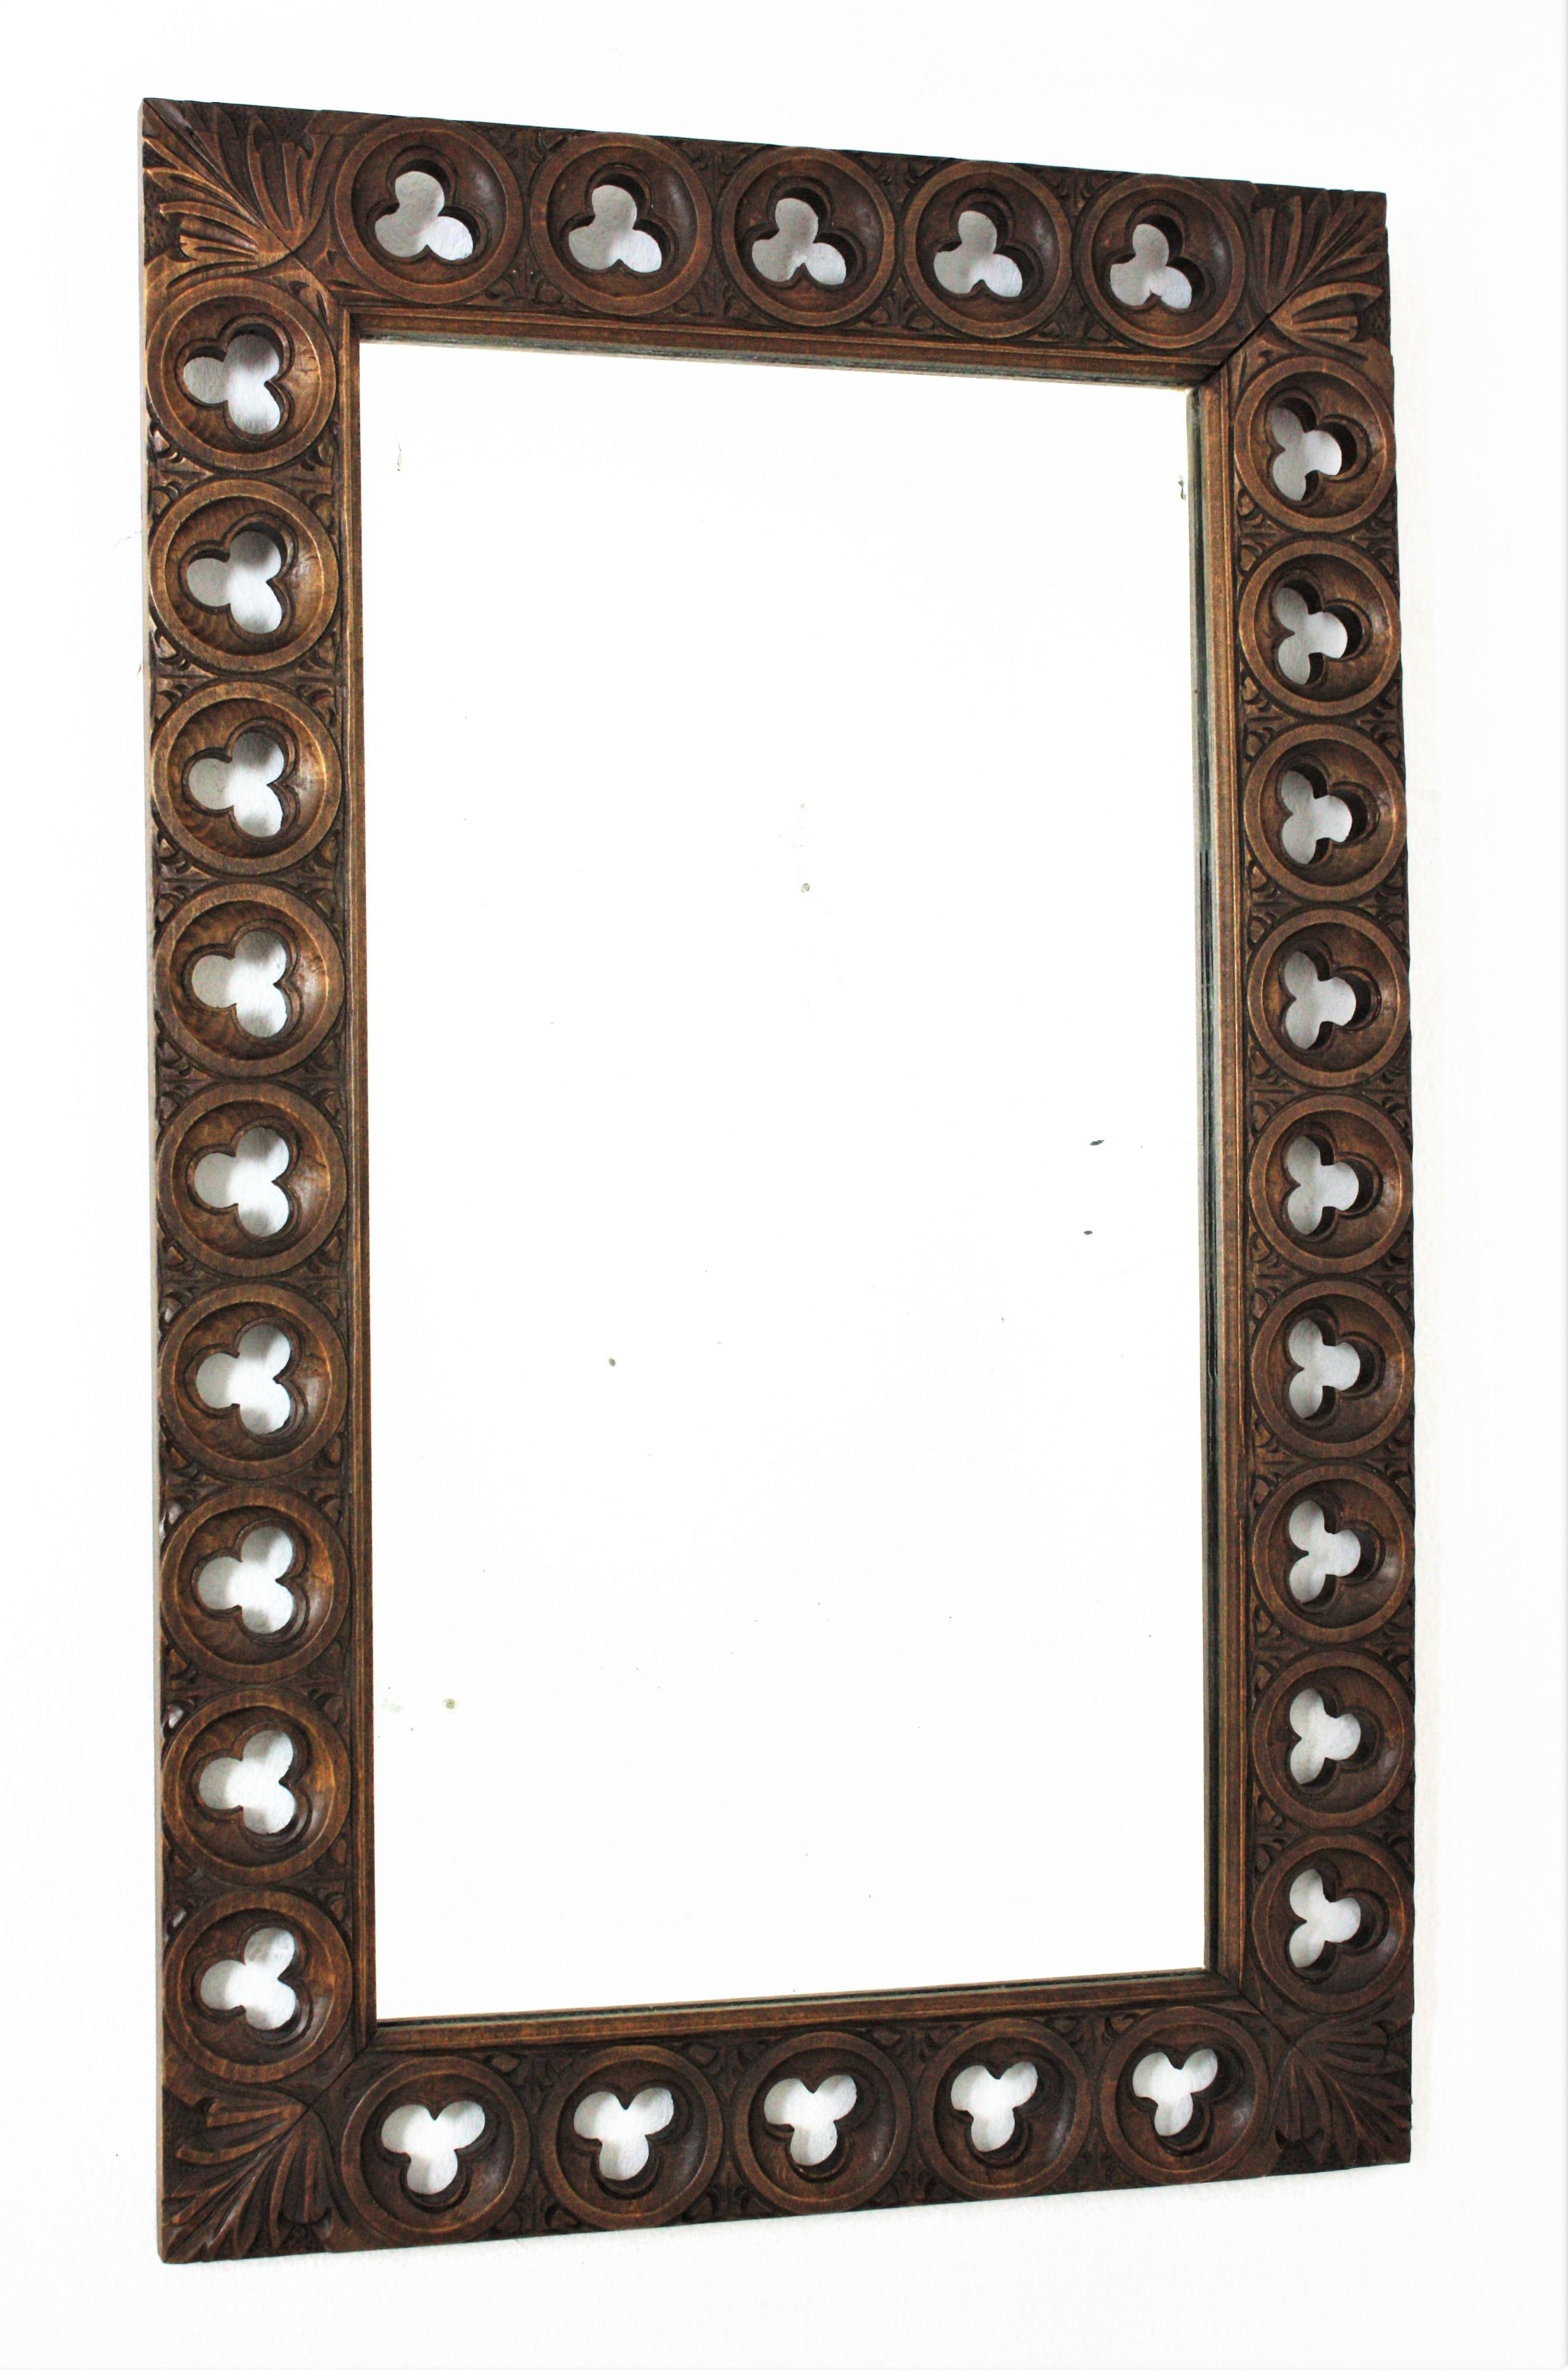 Hand carved Spanish Colonial Romanesque inspired wall mirror, Spain, 1940s.
Beautiful frame with carving details with Romanesque accents. The frame is beautifully adorned by foliage and lobular floral carvings.
It will be a nice a addition to a